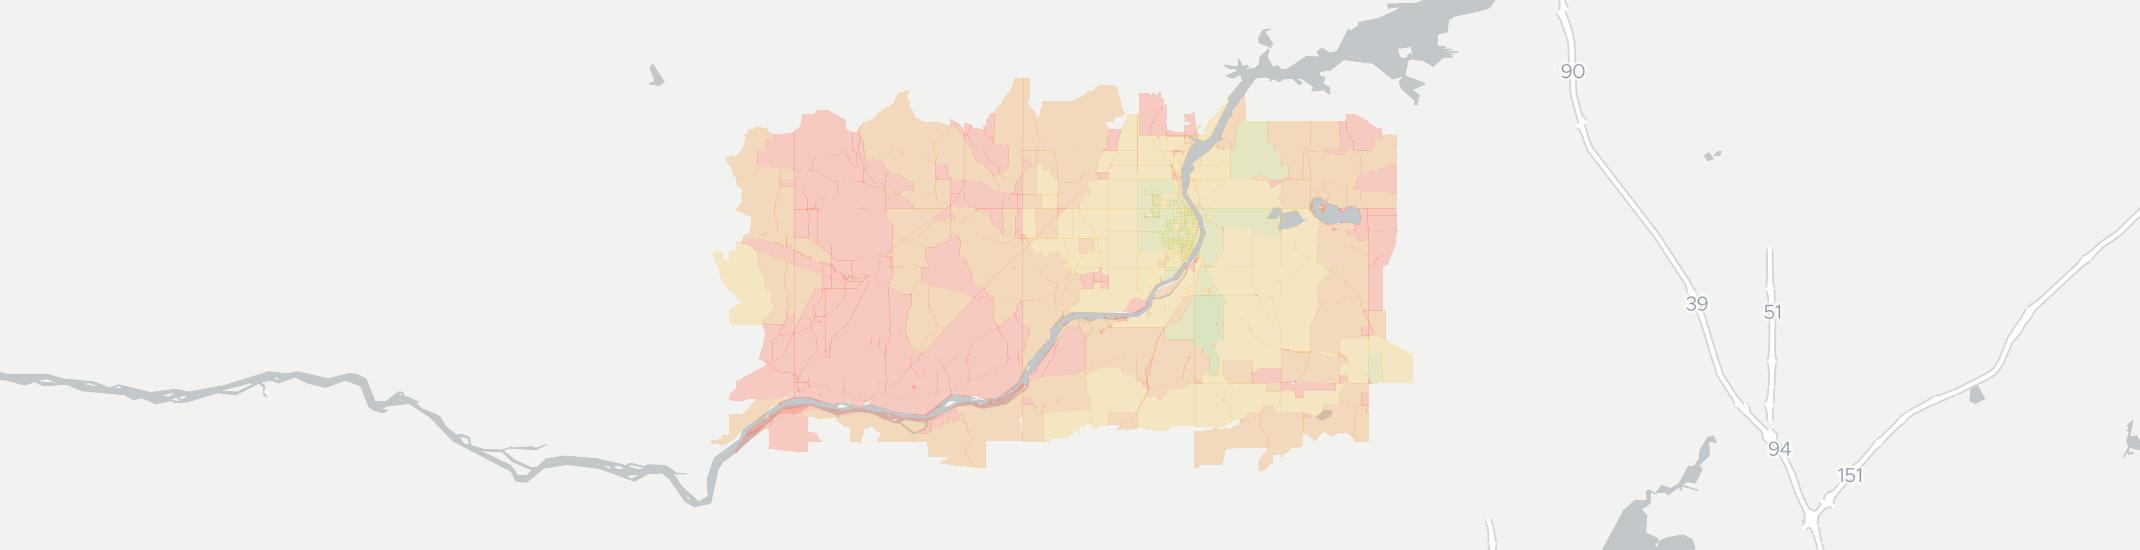 Sauk City Internet Competition Map. Click for interactive map.